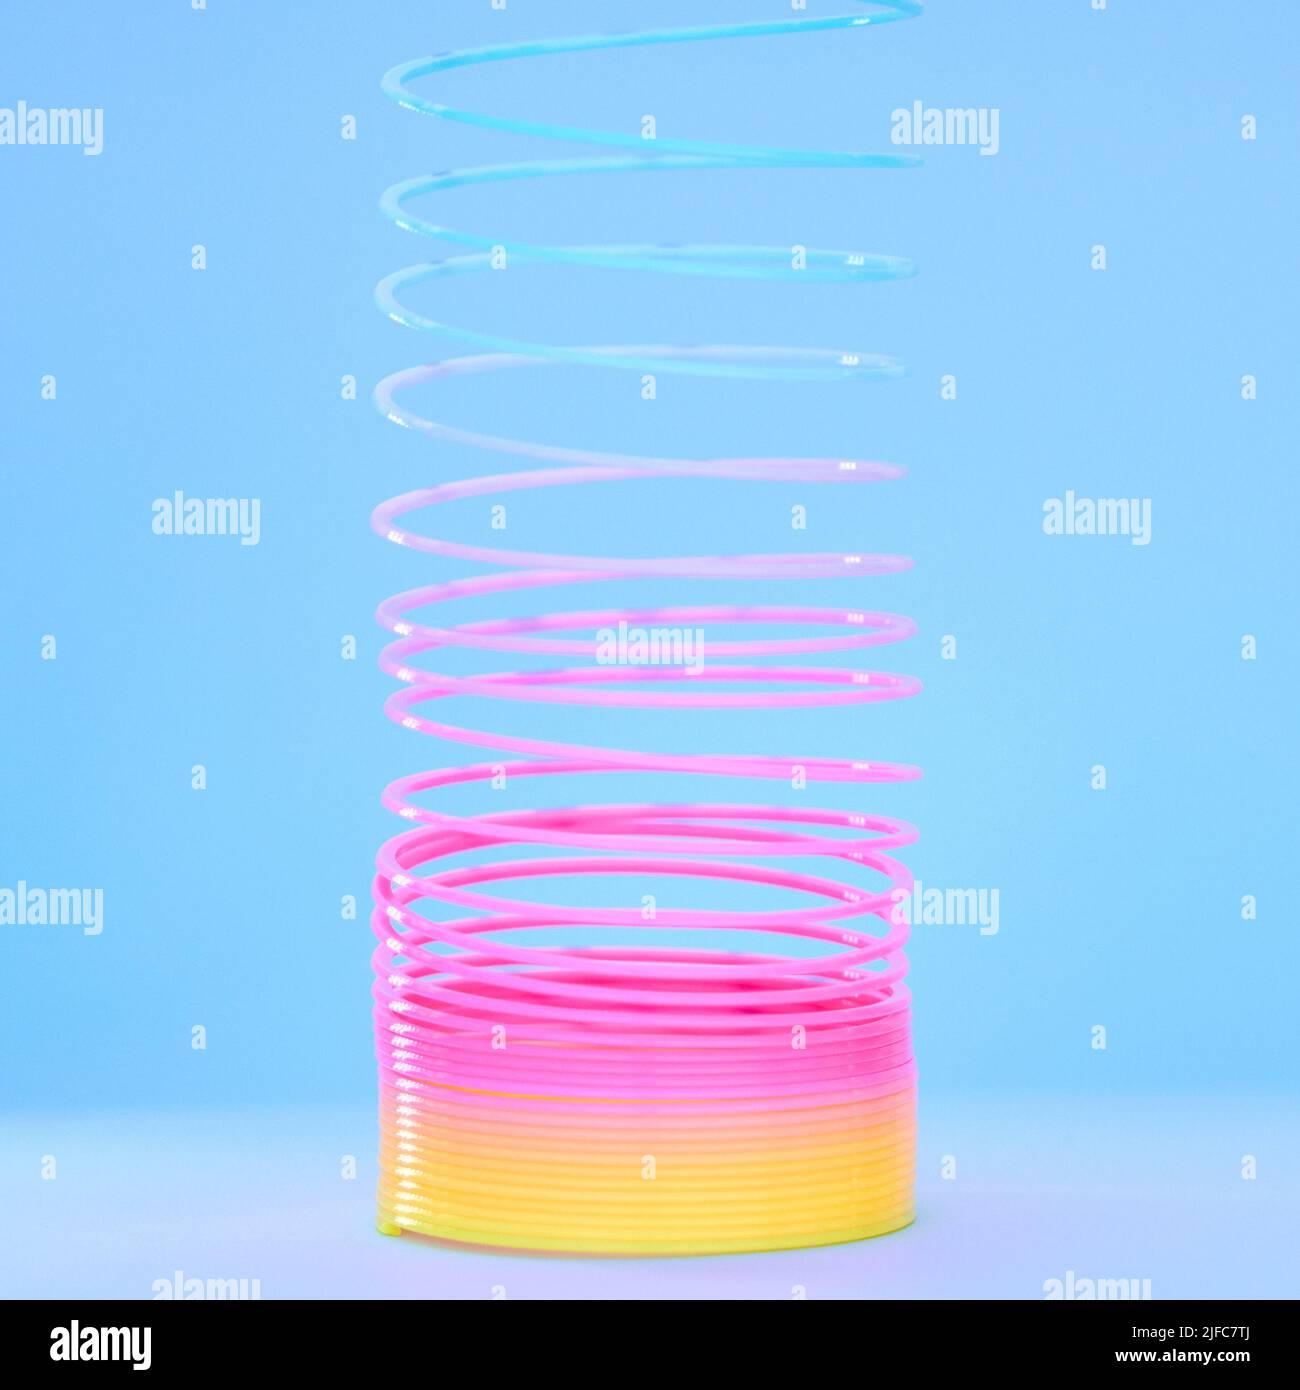 Spiral slinky toy isolated against a blue background. Closeup of a colourful retro plastic toy stretching, twirling and coiling. Spring toy for Stock Photo